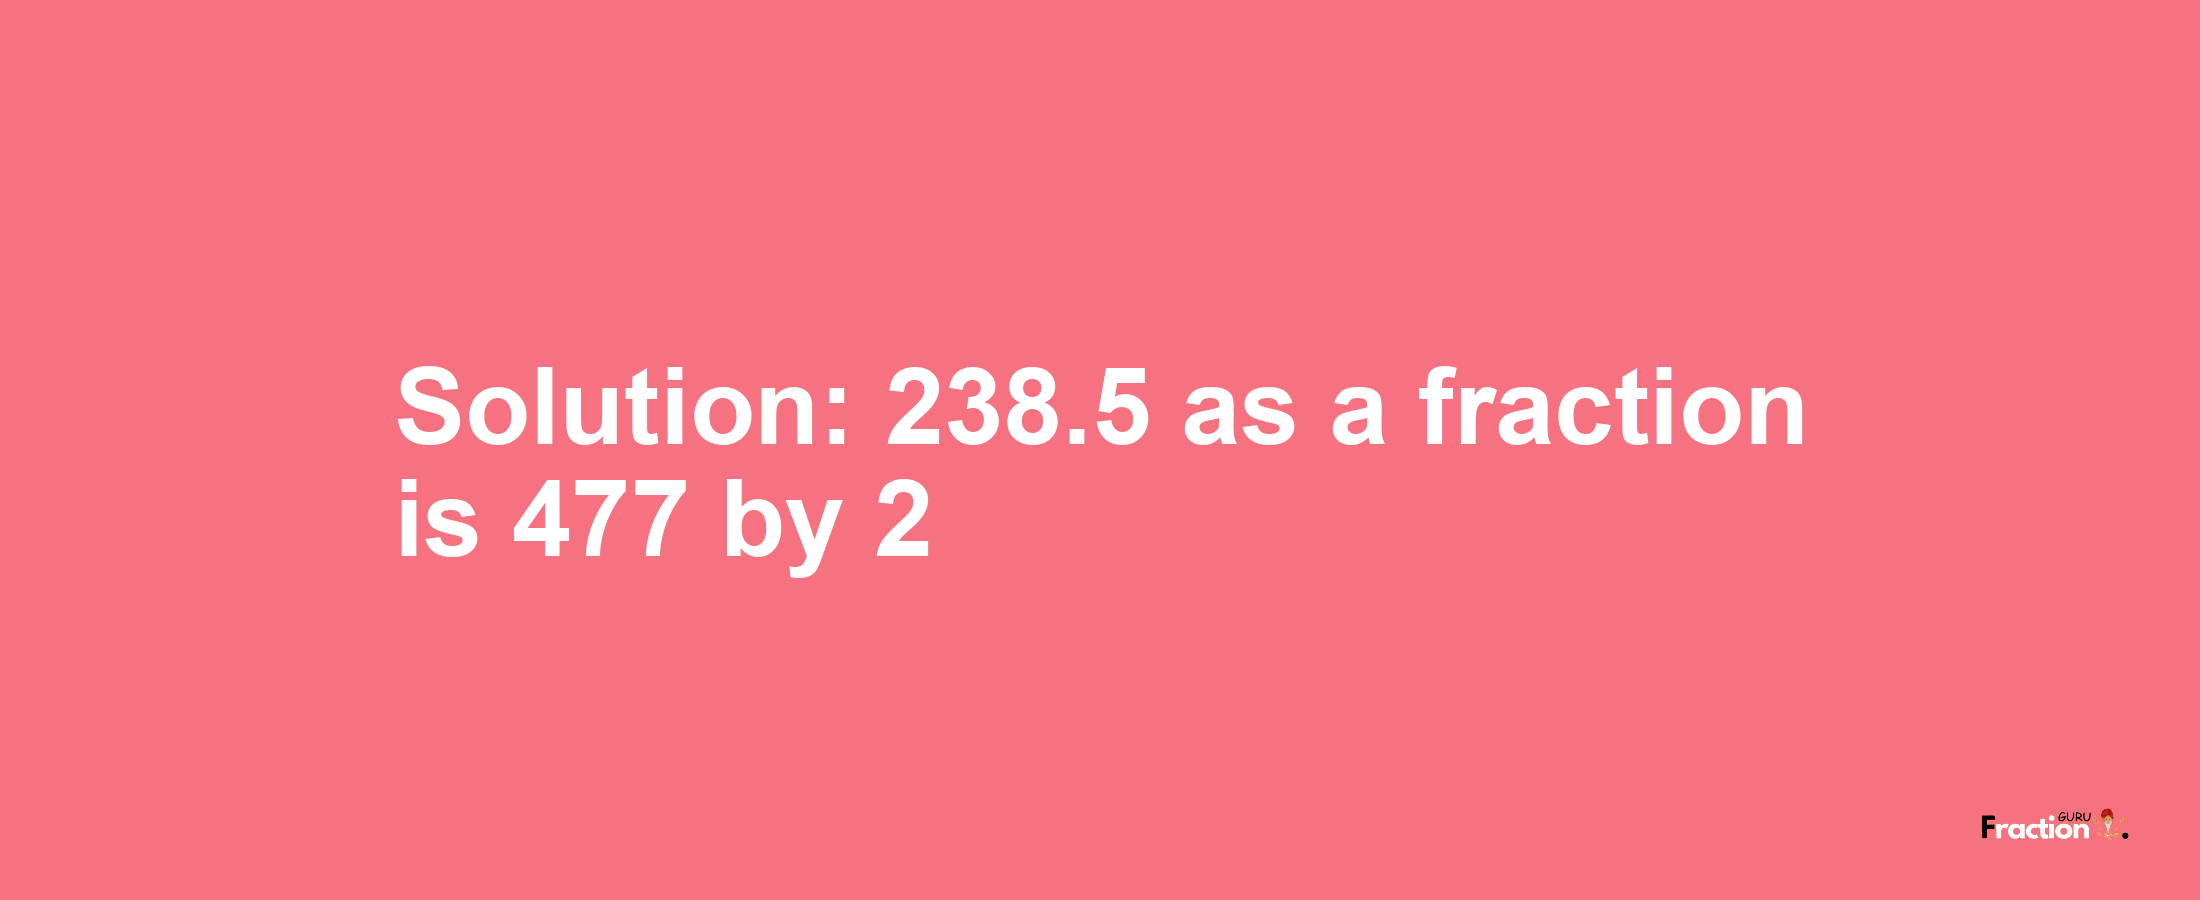 Solution:238.5 as a fraction is 477/2